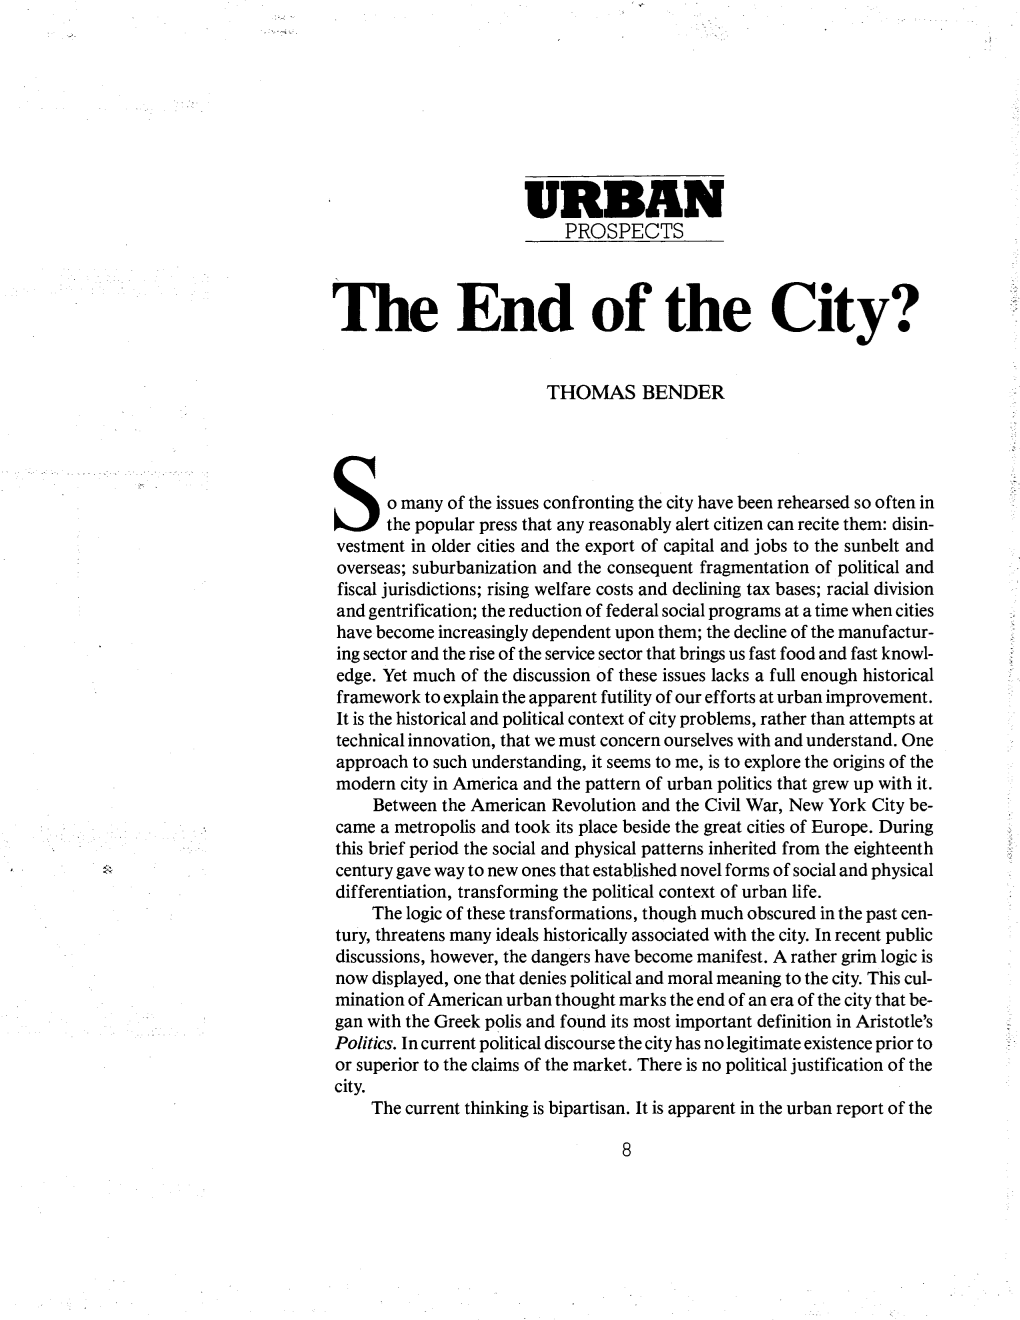 Thomas Bender / the End of the City?